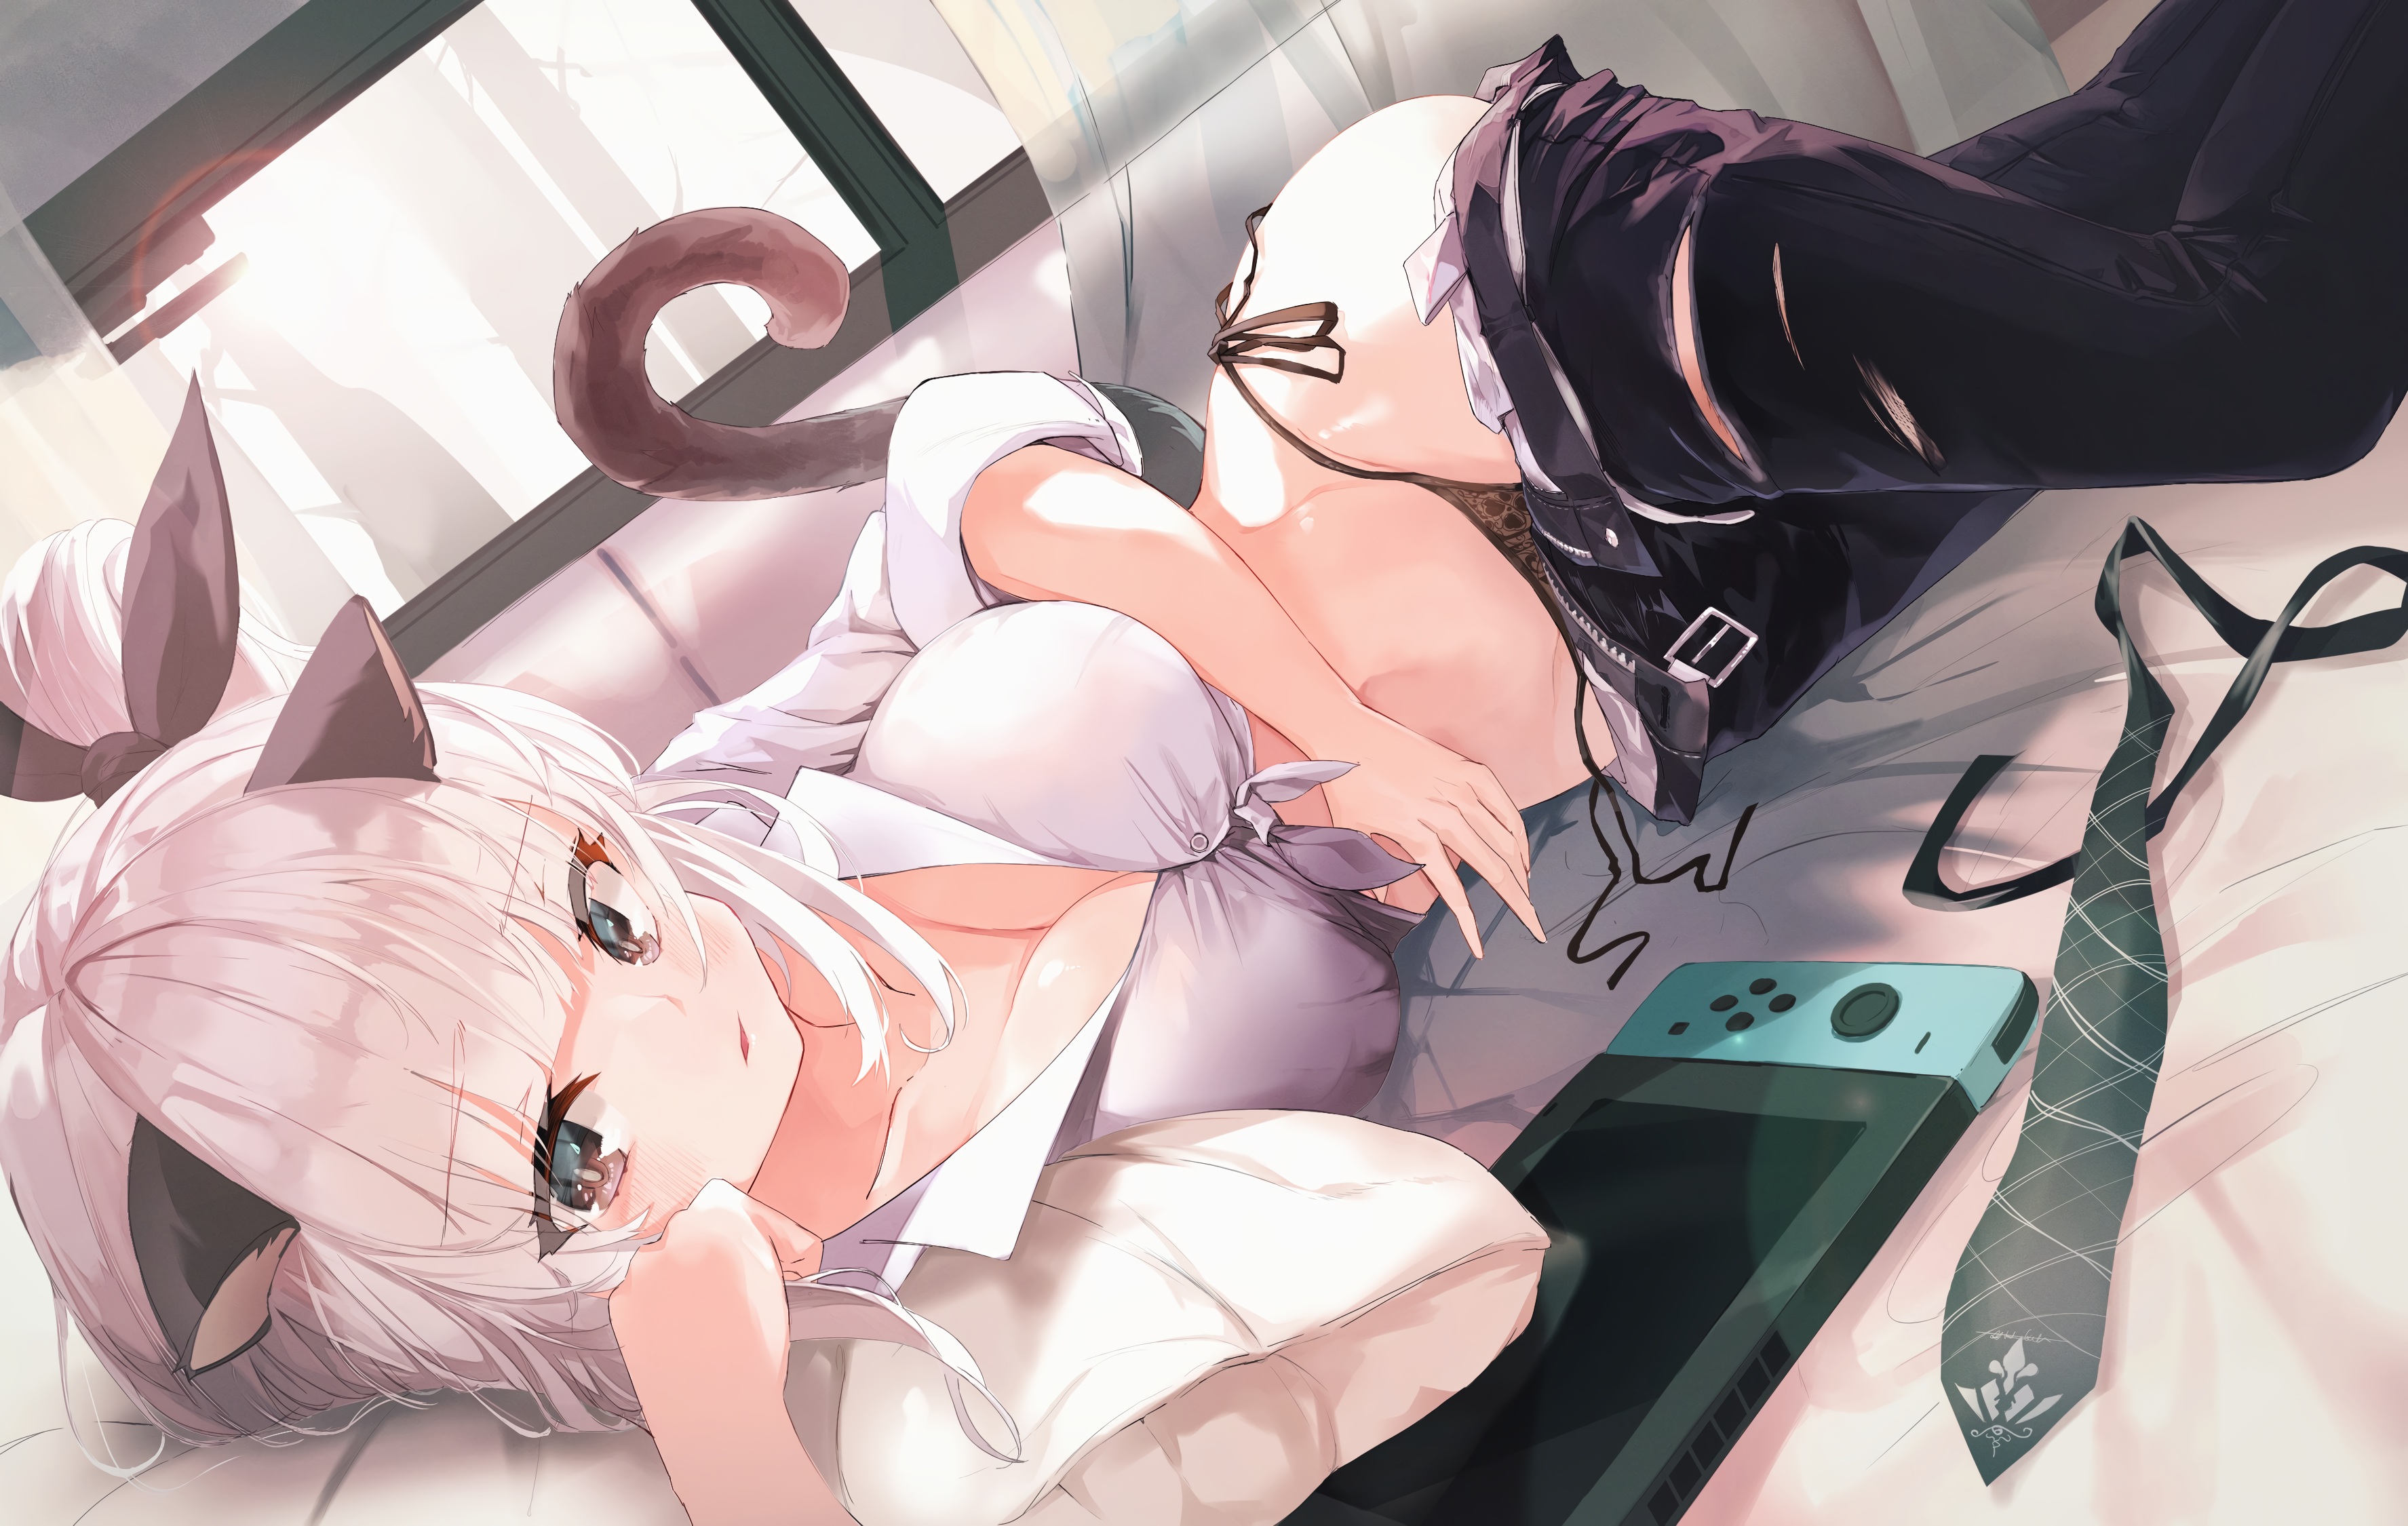 Anime 3550x2250 anime anime girls cleavage cat girl white hair brown eyes in bed open clothes panties big boobs artwork Kooemong